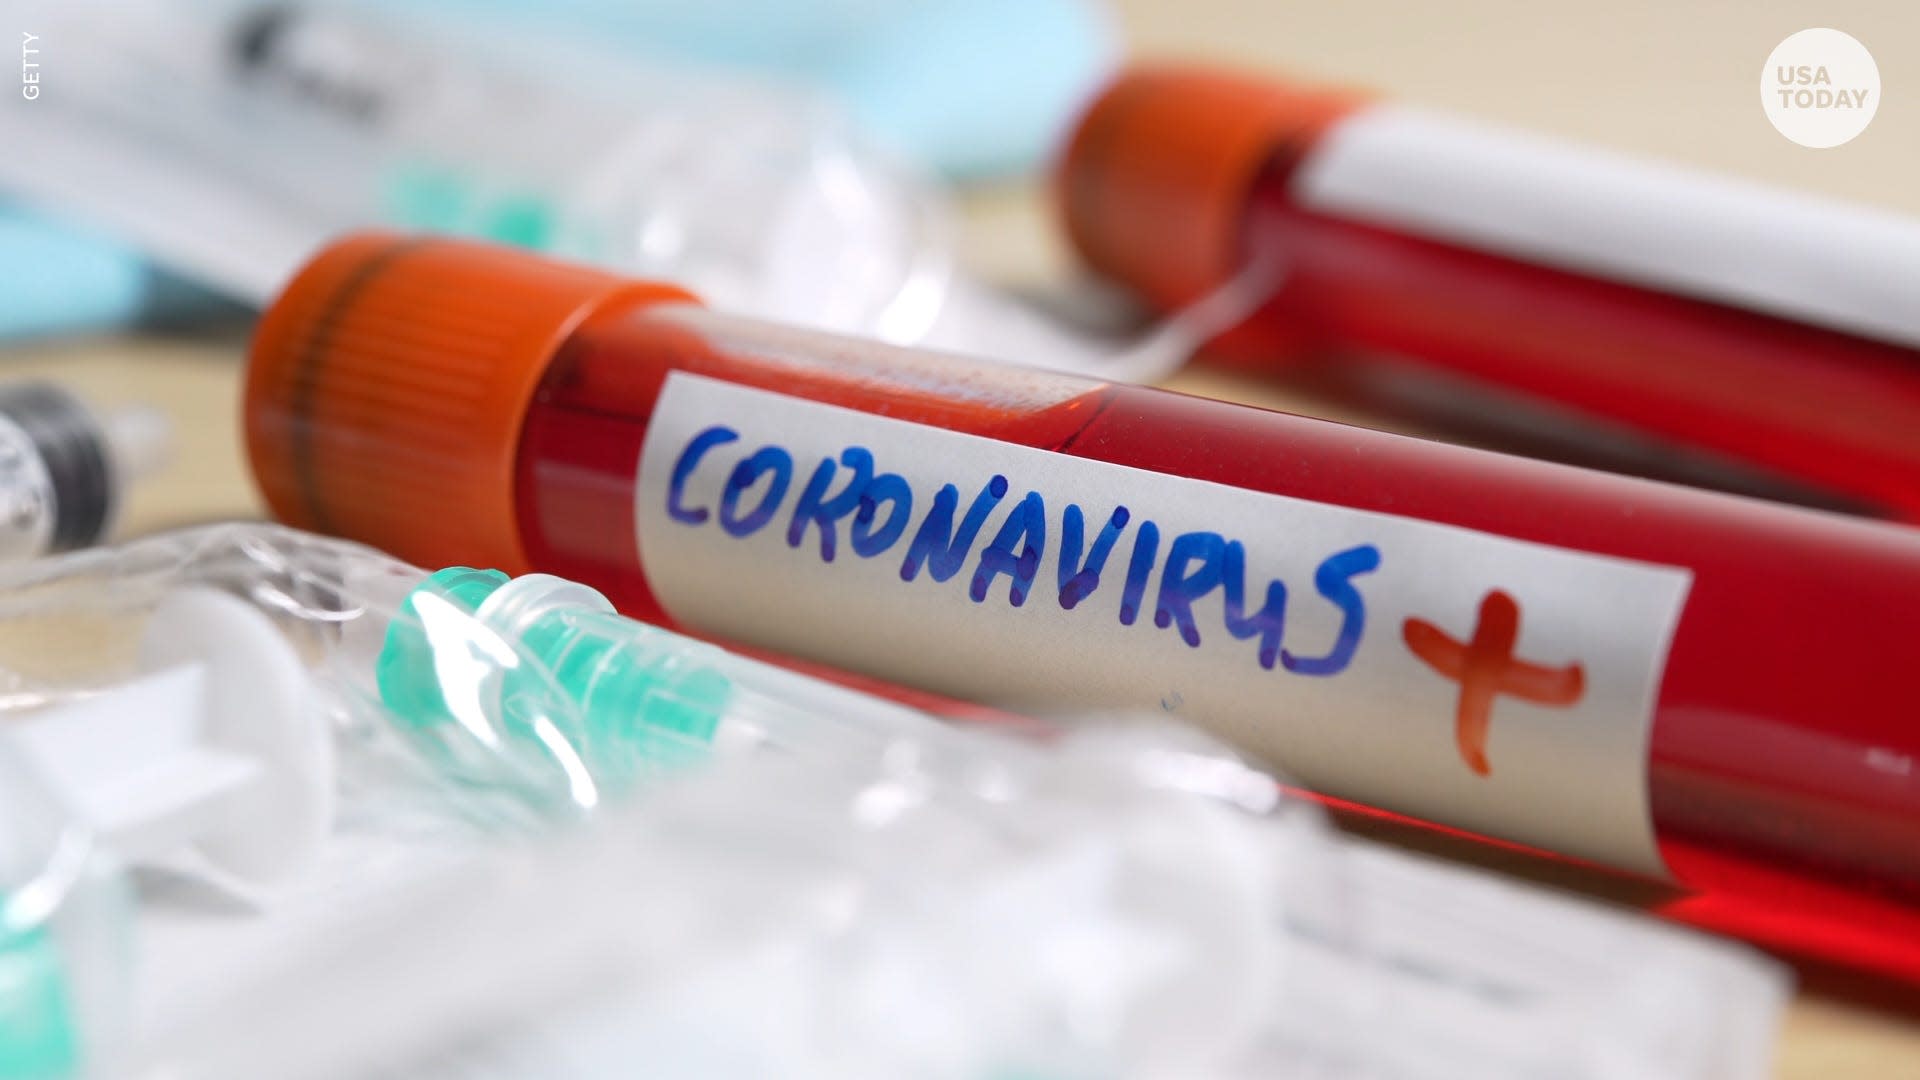 There may be a COVID-19 vaccine by the end of the year ...